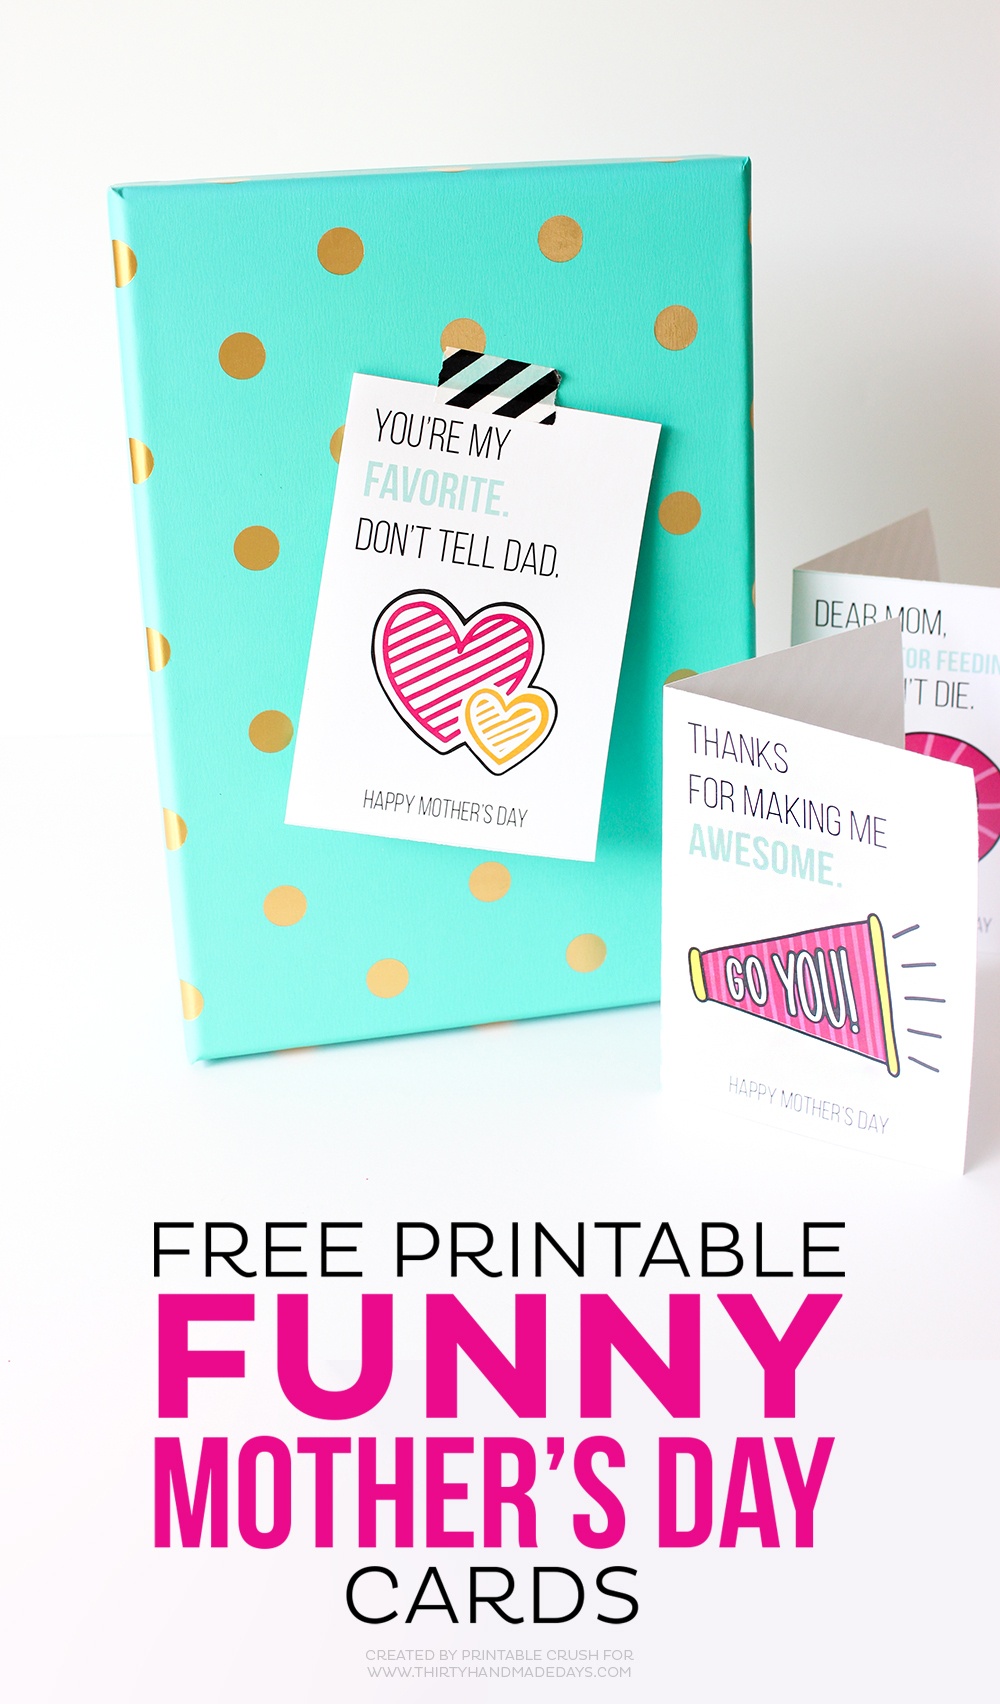 Printable Mother&amp;#039;s Day Cards - Free Funny Printable Cards